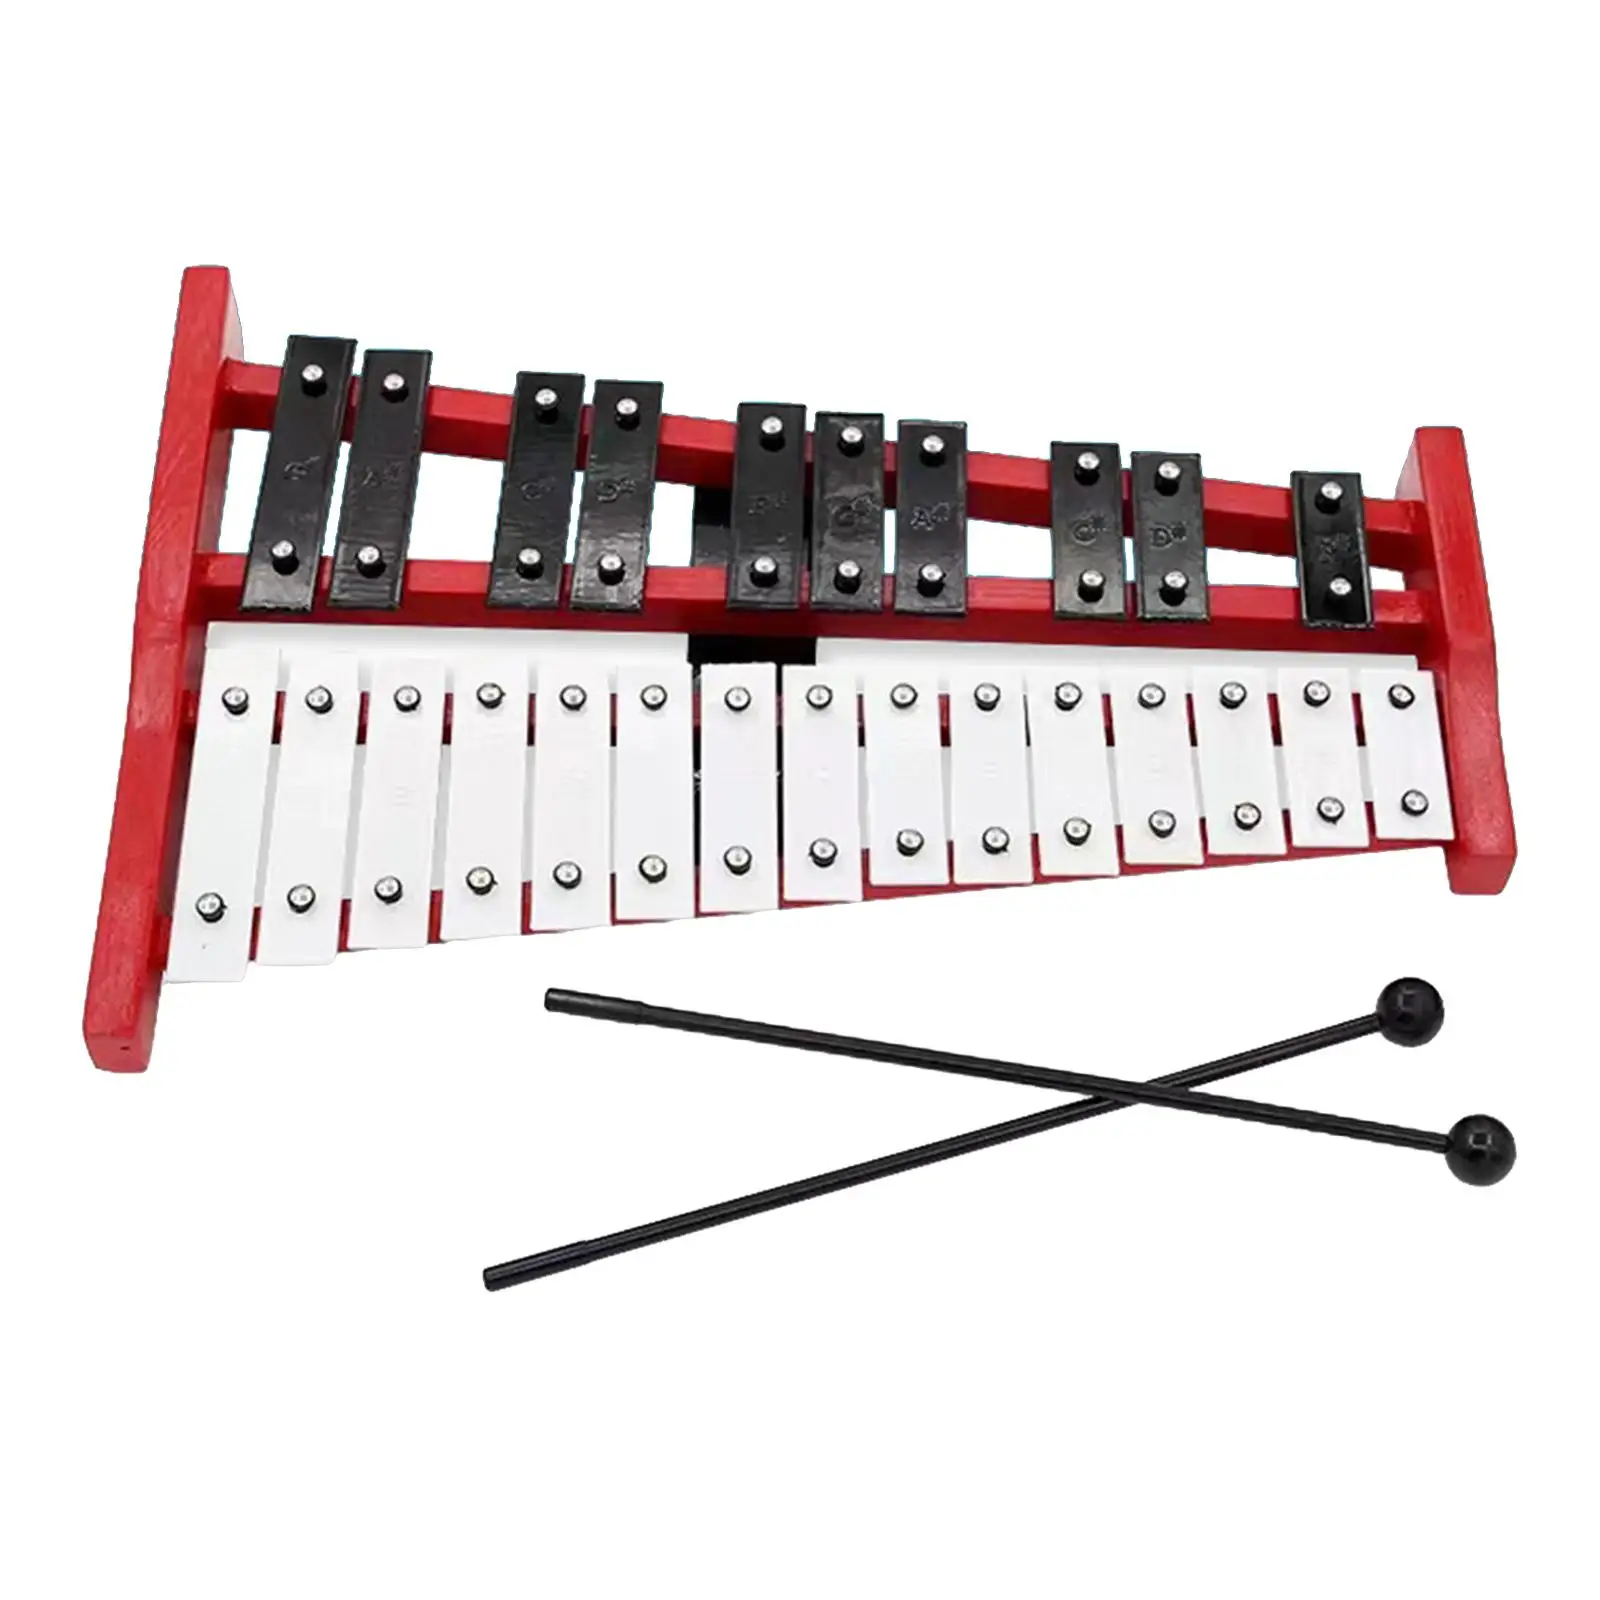 Kids Music Glockenspiel Percussion Hand Knock Piano Toy for Outside Live Performance Concert Music Lessons School Orchestras